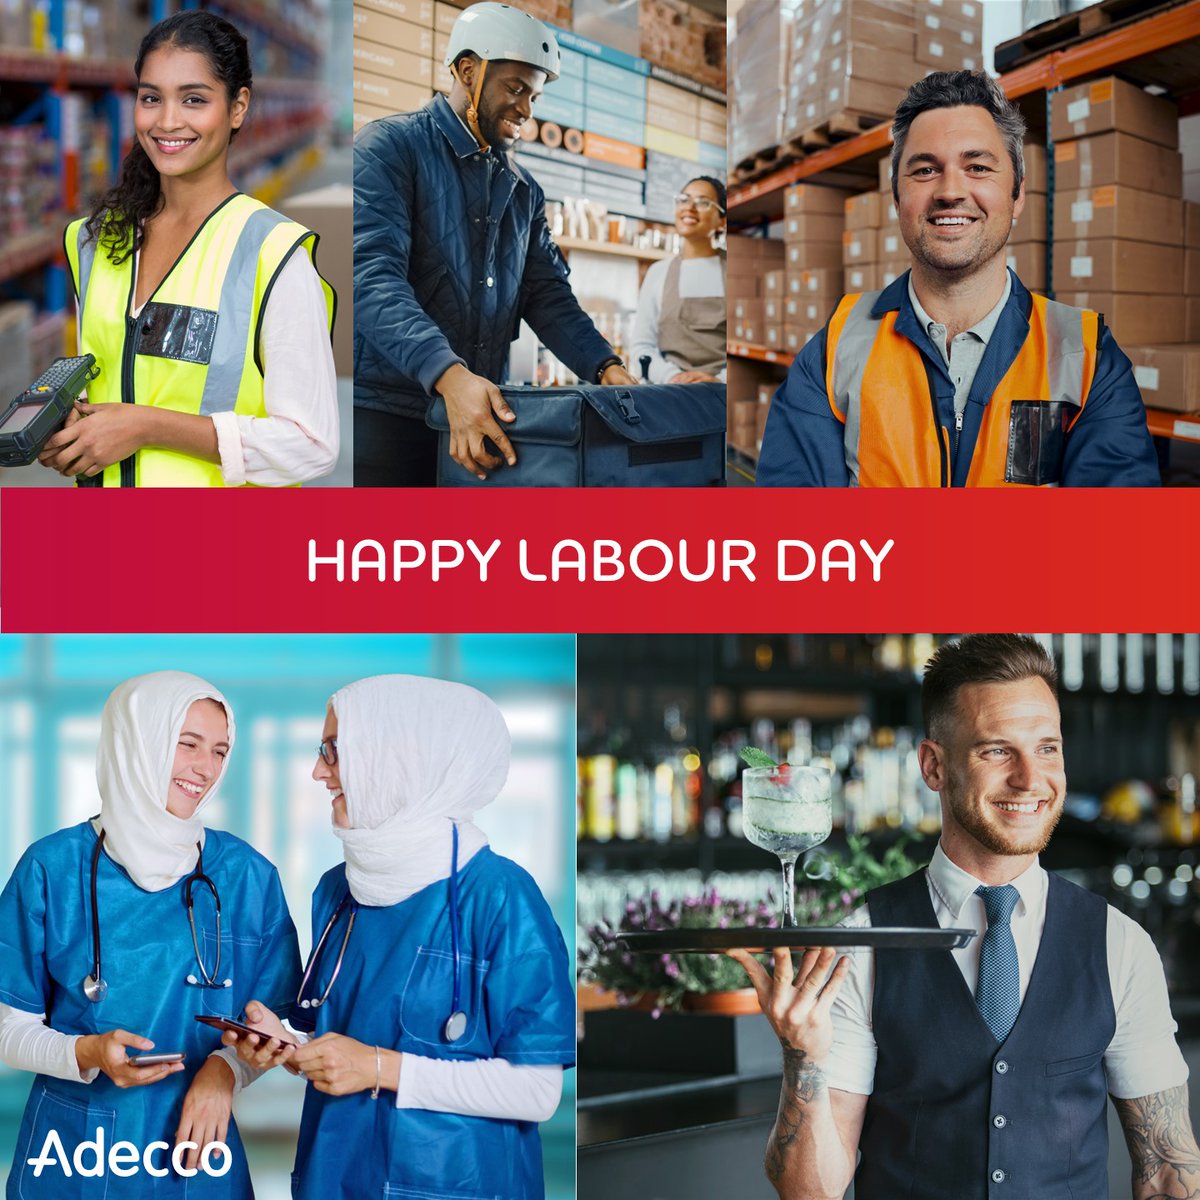 Happy International Workers' Day! Let's recognize the invaluable contributions of workers everywhere, who are building a better world for everyone.

#InternationalWorkersDay #futureworkforce#AdeccoMiddleEast